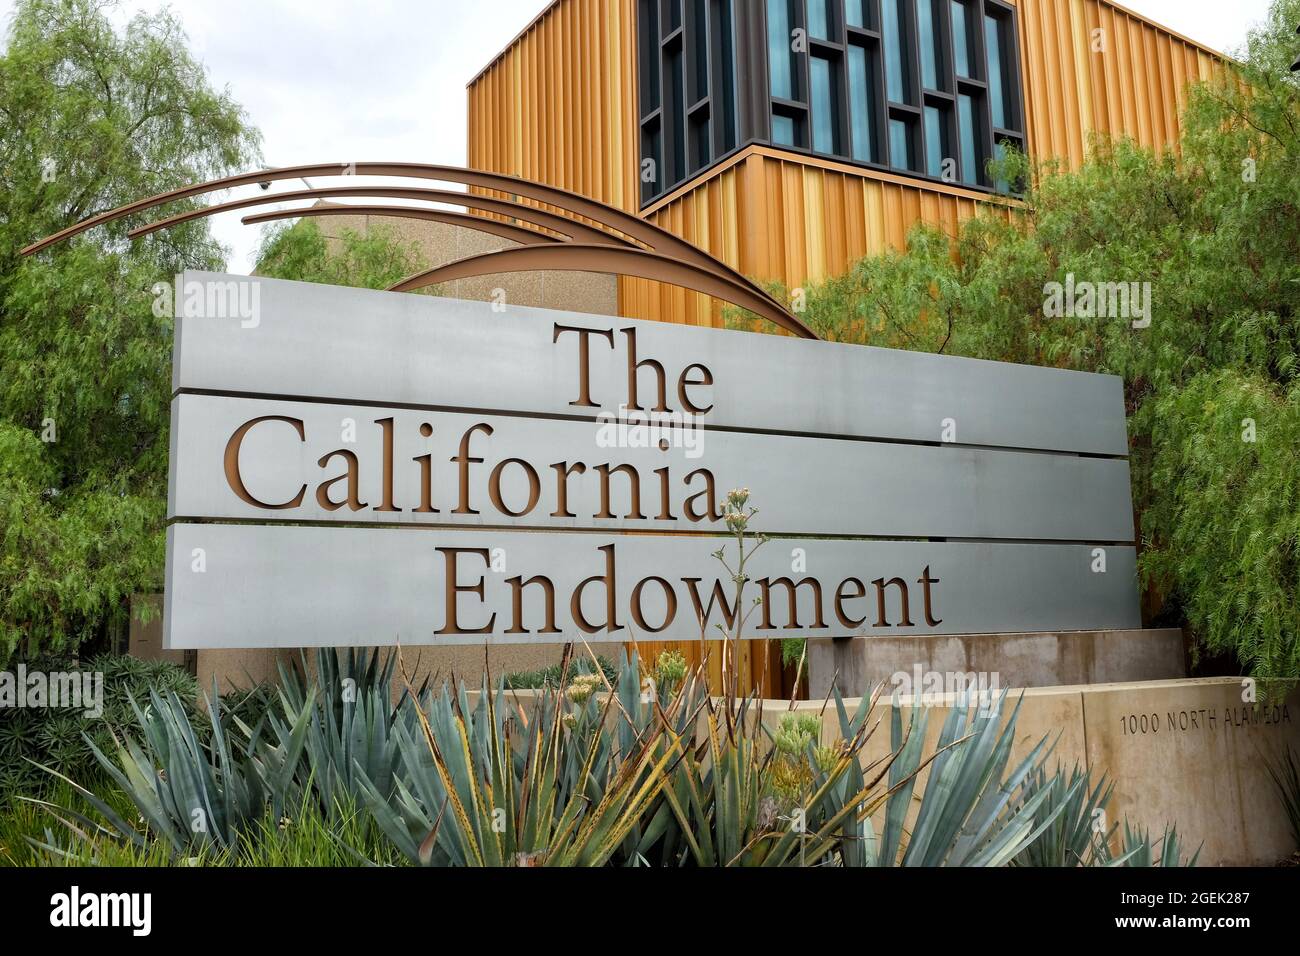 LOS ANGELES, CALIFORNIA - 18 AUG 2021: The California Endowment aims to expand access to affordable, quality health care for underserved individuals a Stock Photo